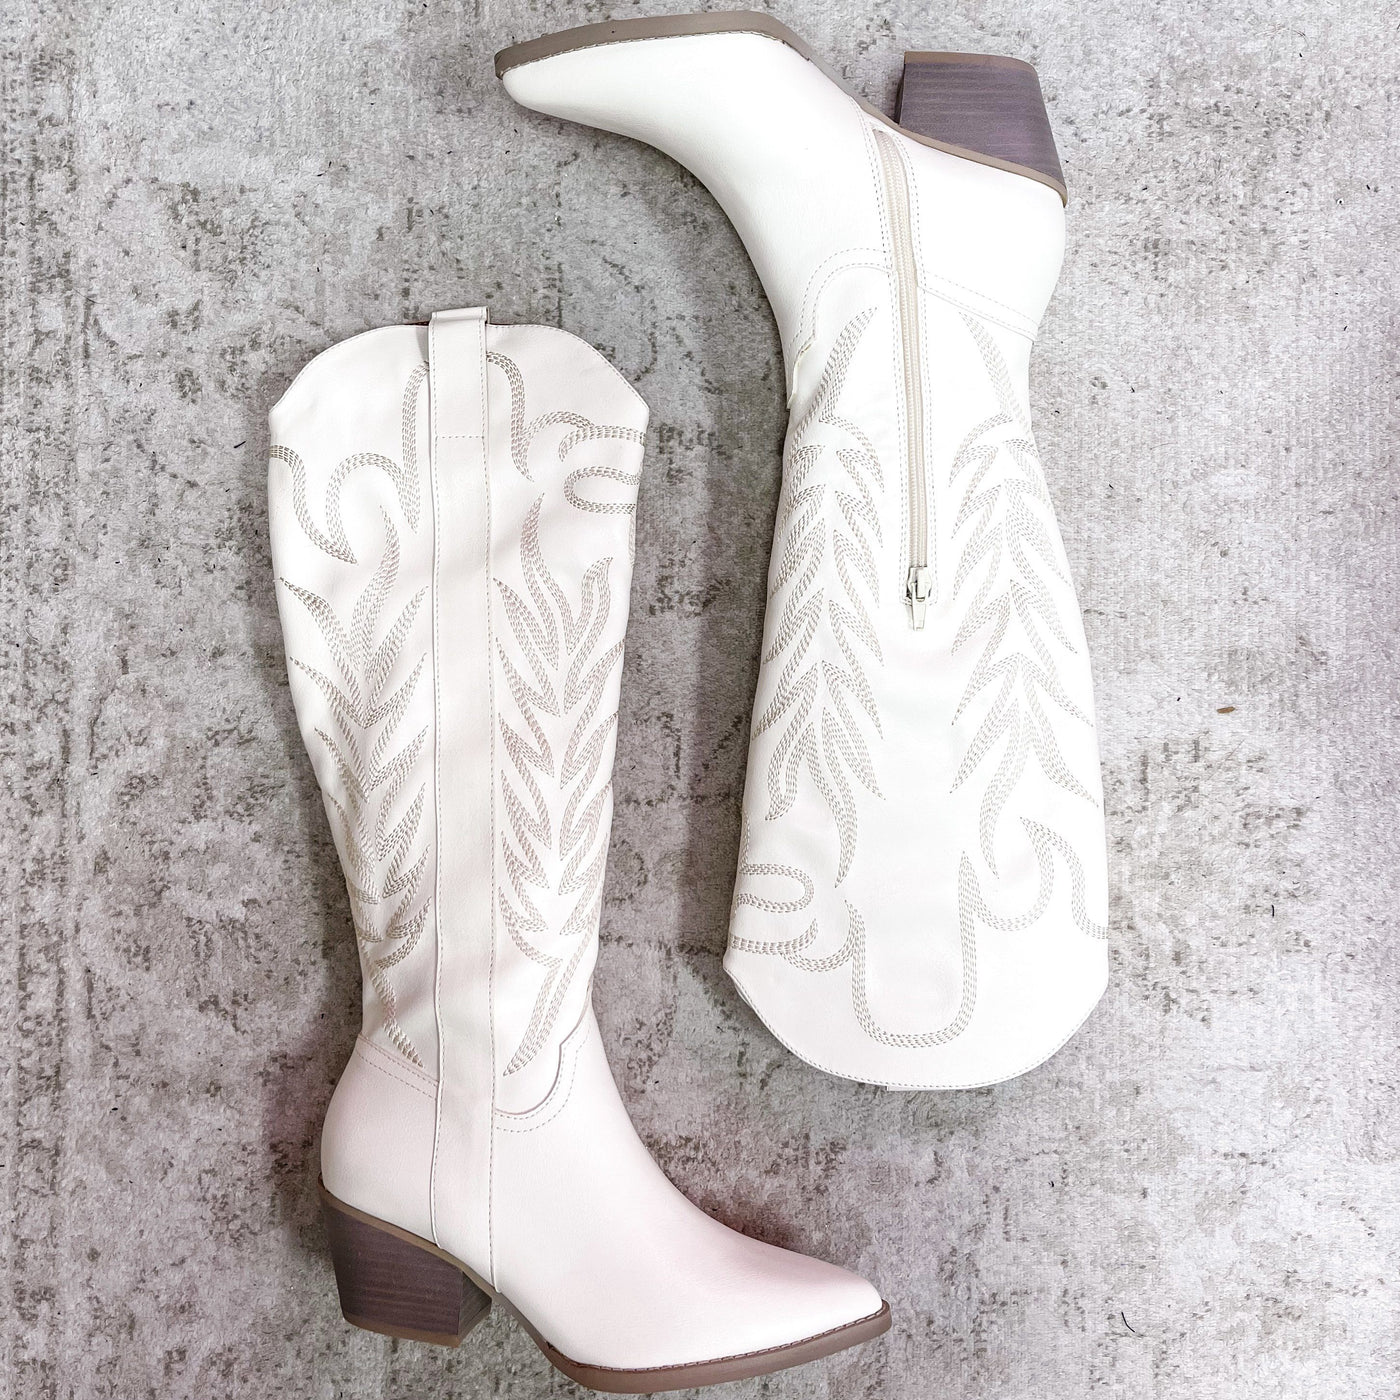 Samara Knee High Cowboy Boots: Off White - Bella and Bloom Boutique